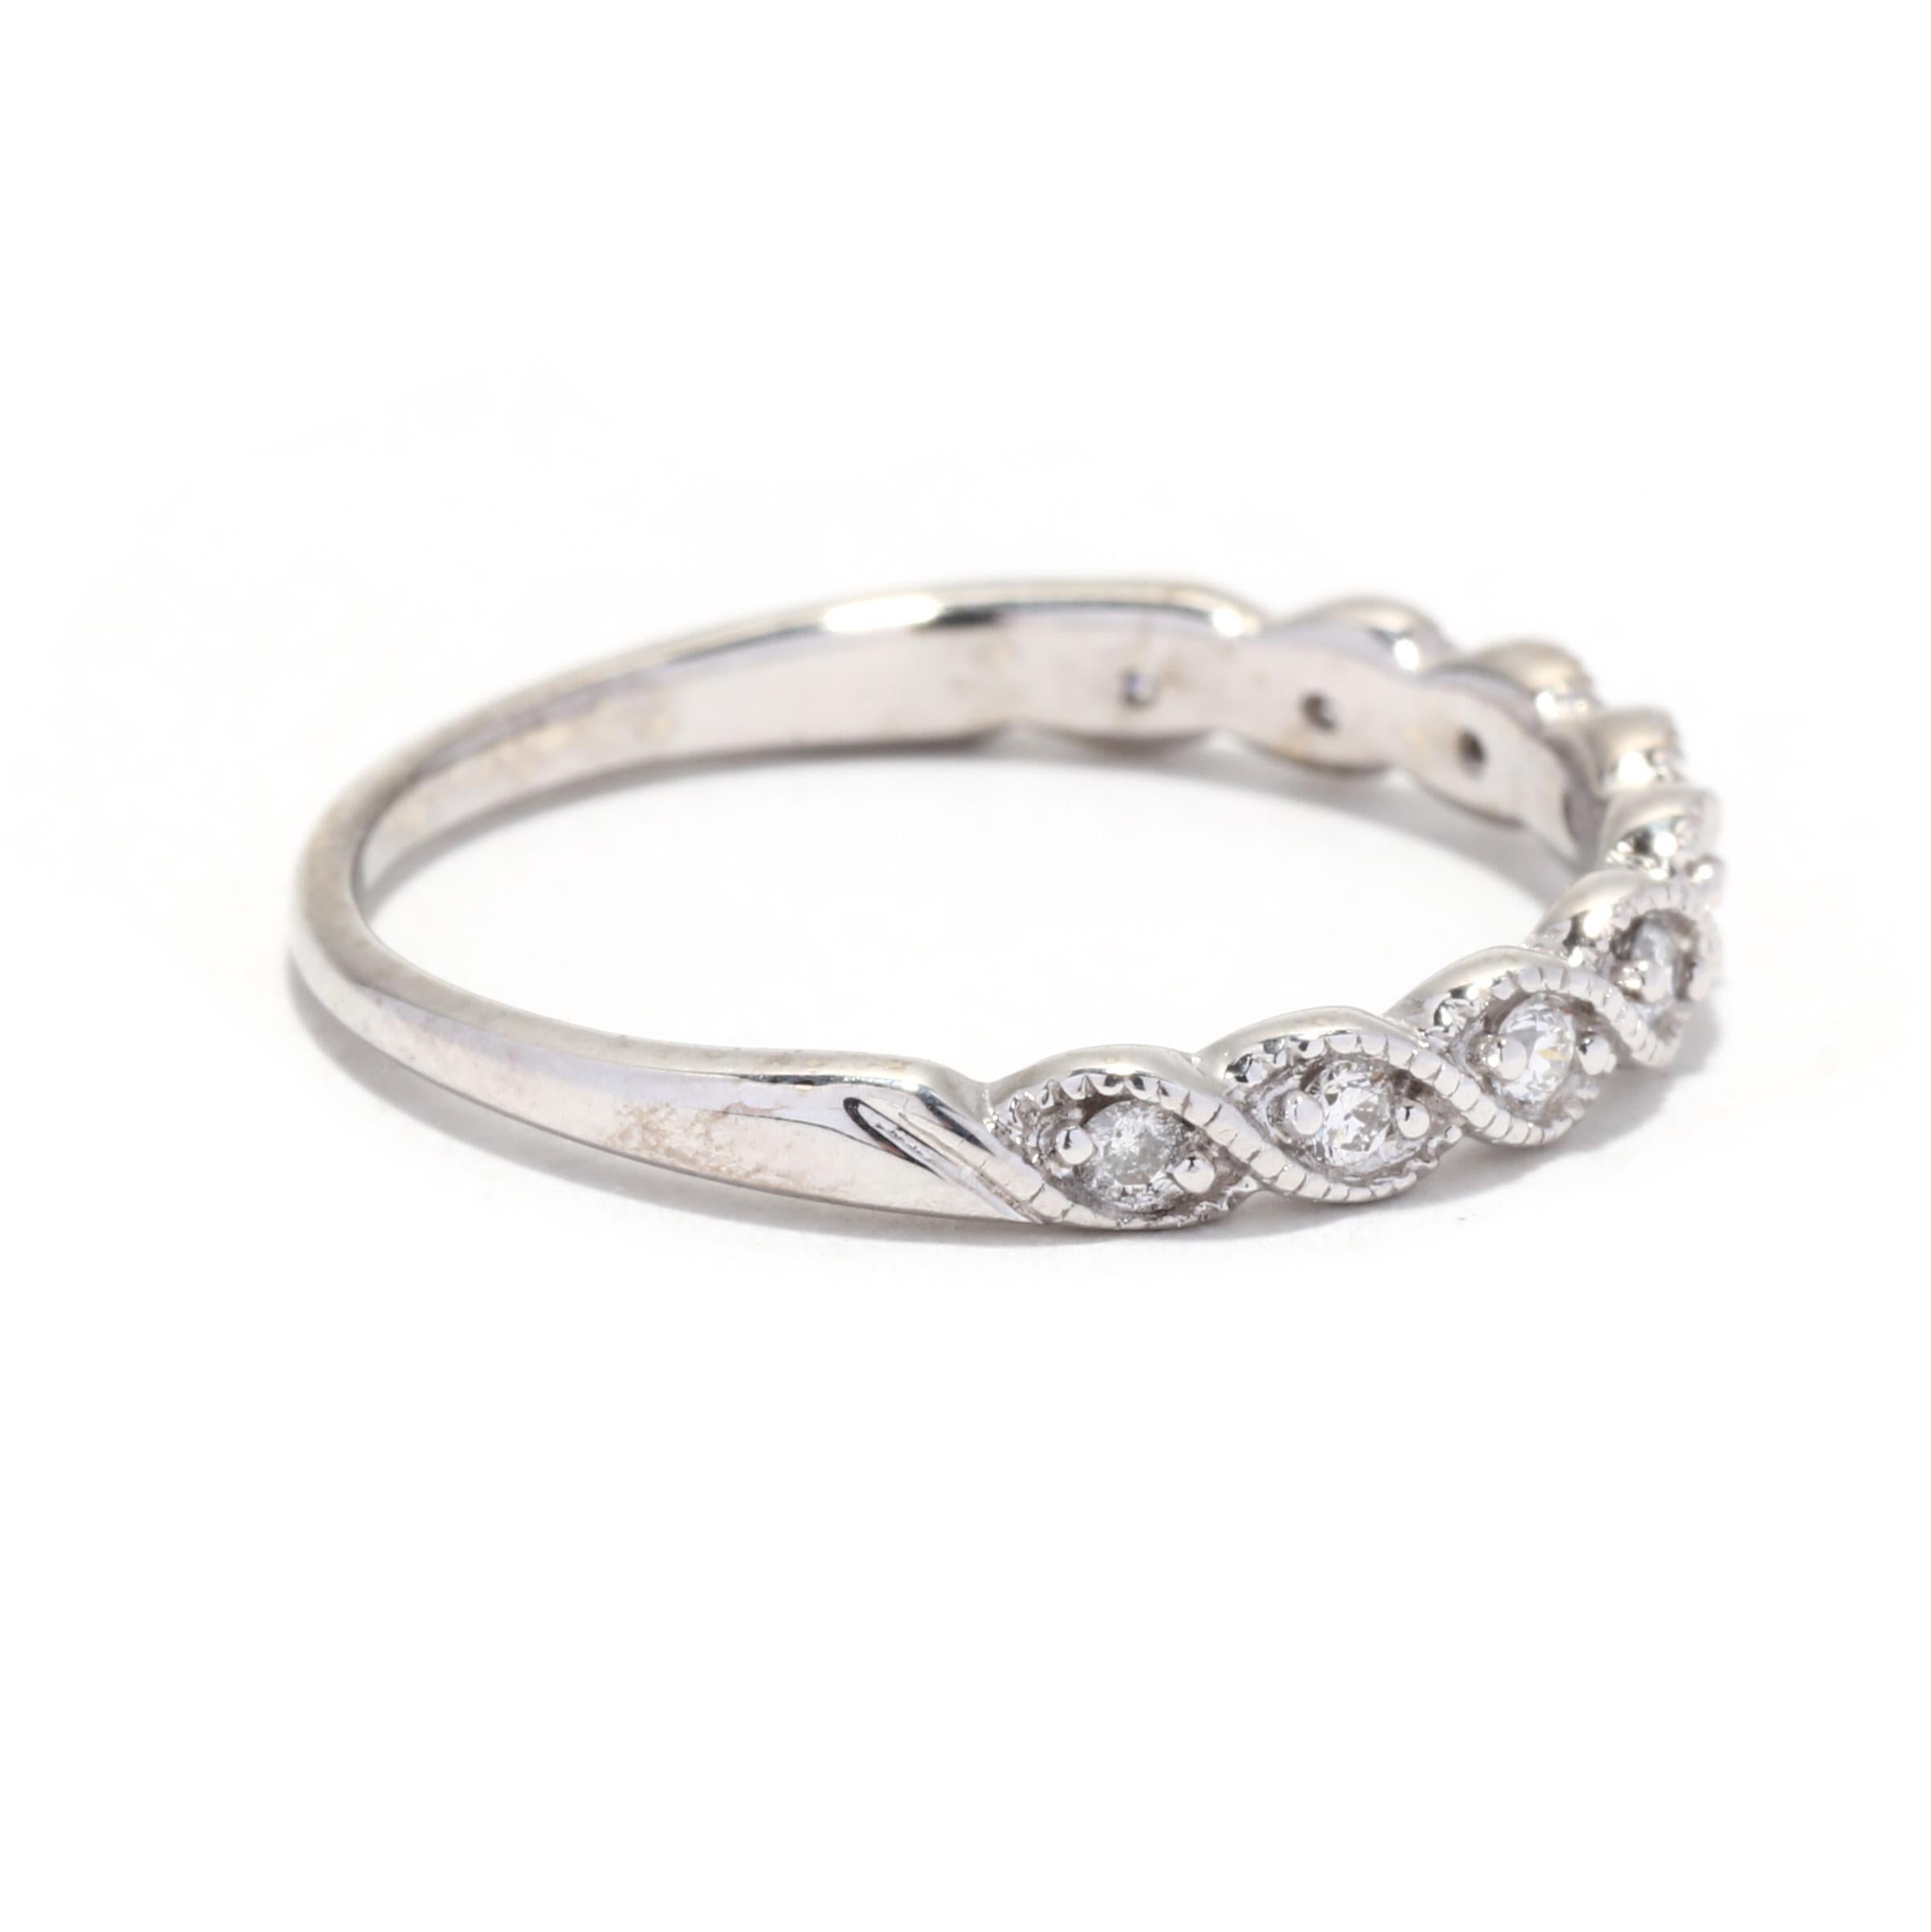 A vintage 14 karat white gold scalloped diamond wedding band ring. This stackable band features  a scalloped design of marquise shapes set with round brilliant cut diamonds weighing approximately .15 total carats and with a tapered band.

Stones:
-